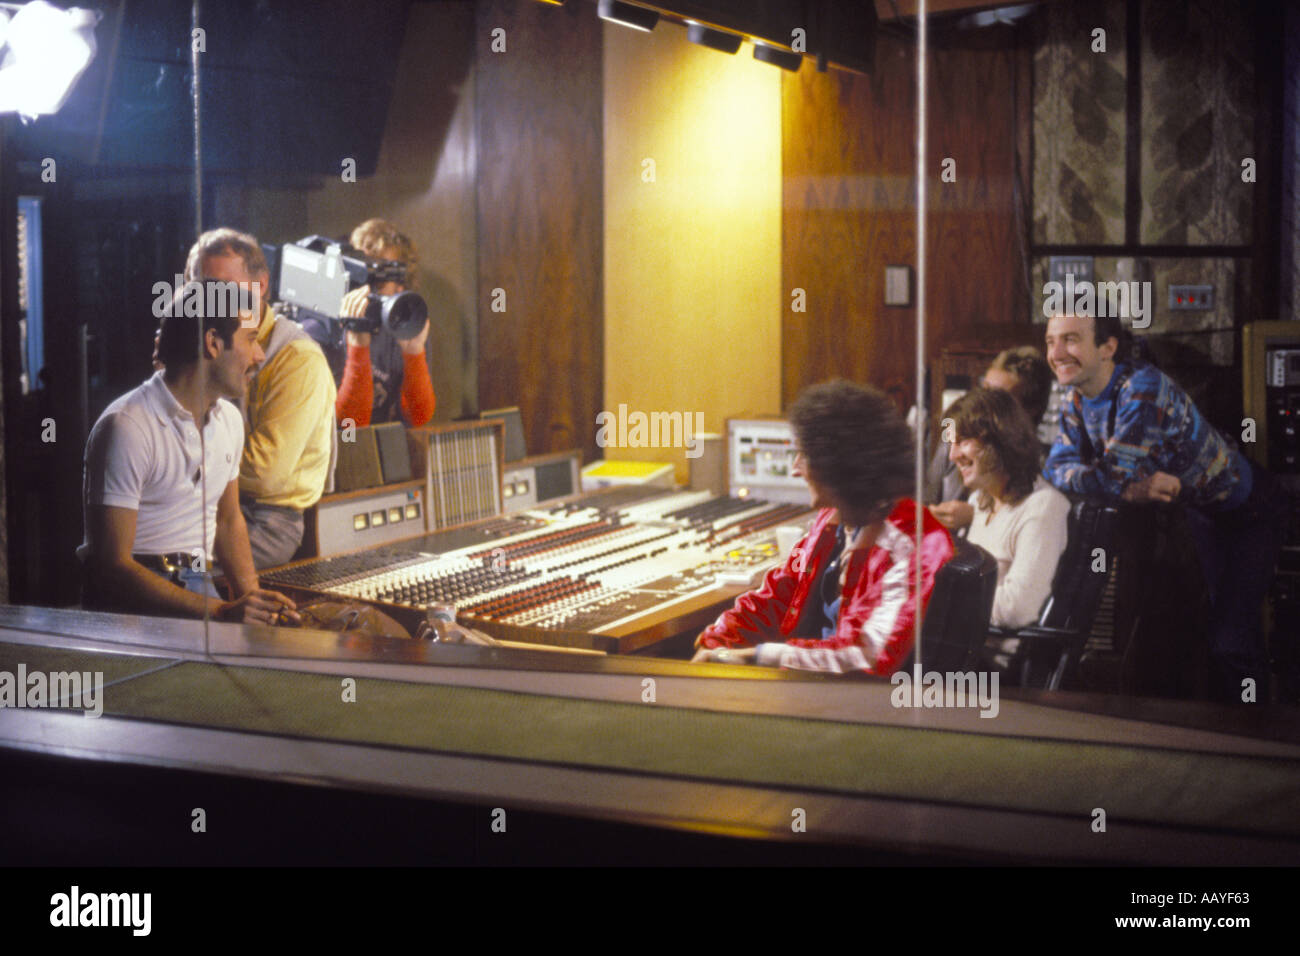 Freddie Mercury lead singer rock group Queen in control room 22 October 1980 with Brian May and others from the group PER0028 Stock Photo